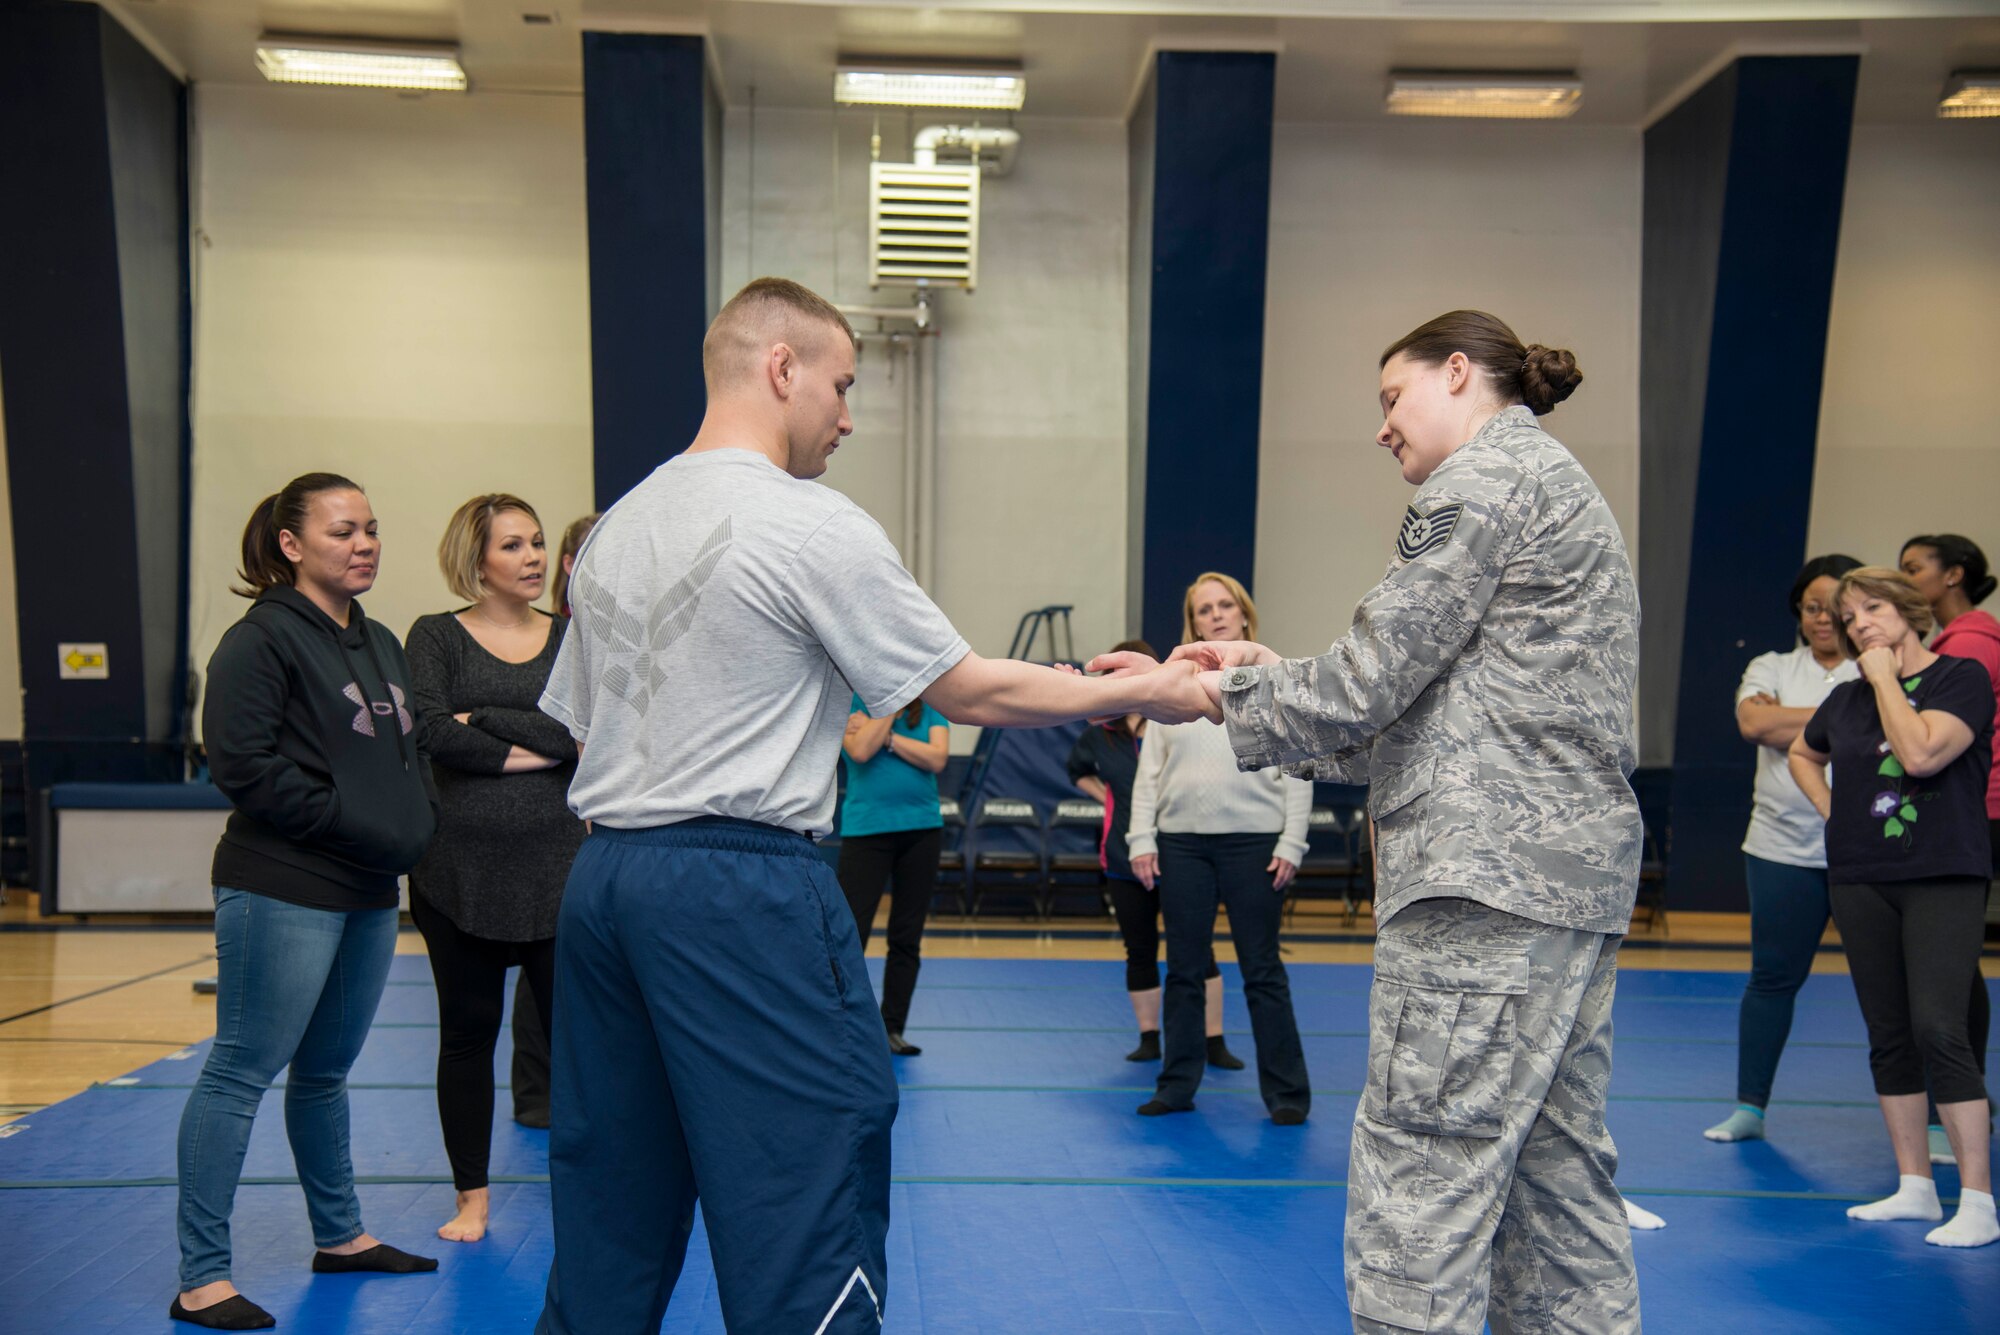 U.S. Air Force Senior Airman Christian Brancato, 35th Logistics Readiness Squadron fuel distribution operator, left, and Tech. Sgt. Sarah Quattrocchi, 35th Security Forces Squadron assistant flight chief, demonstrate self-defense moves during Wingman Day at Misawa Air Base, Japan, March 31, 2017. The self-defense class was open to the base populous to help give a better understanding of what to do incase of an attack. (U.S. Air Force Senior Airman Brittany A. Chase)